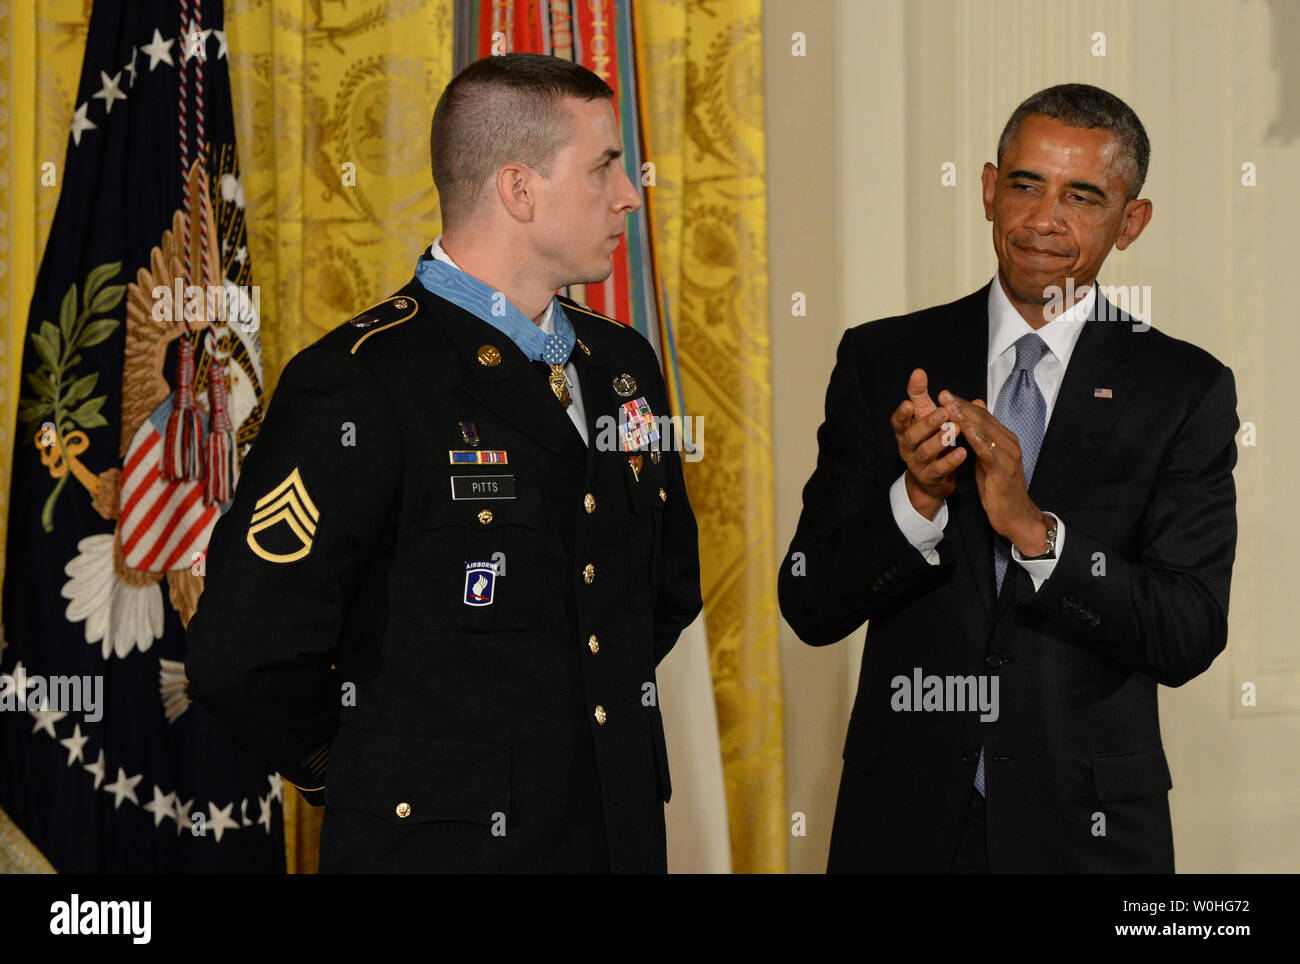 U.S. President Barack Obama applauds after presenting the Medal of Honor to former Army Staff Sergeant Ryan Pitts during a ceremony in the East Room of the White House on July 21, 2014.  Pitts, from the 2nd Platoon, Chosen Company, 2nd Battalion (Airborne), 503rd Infantry Regiment, 173rd Airborne Brigade, was awarded the Nation's highest military honor for his courageous actions during combat operations at Vehicle Patrol Base Kahler in Kunar Province, Afghanistan on July 13, 2008.       UPI/Pat Benic Stock Photo